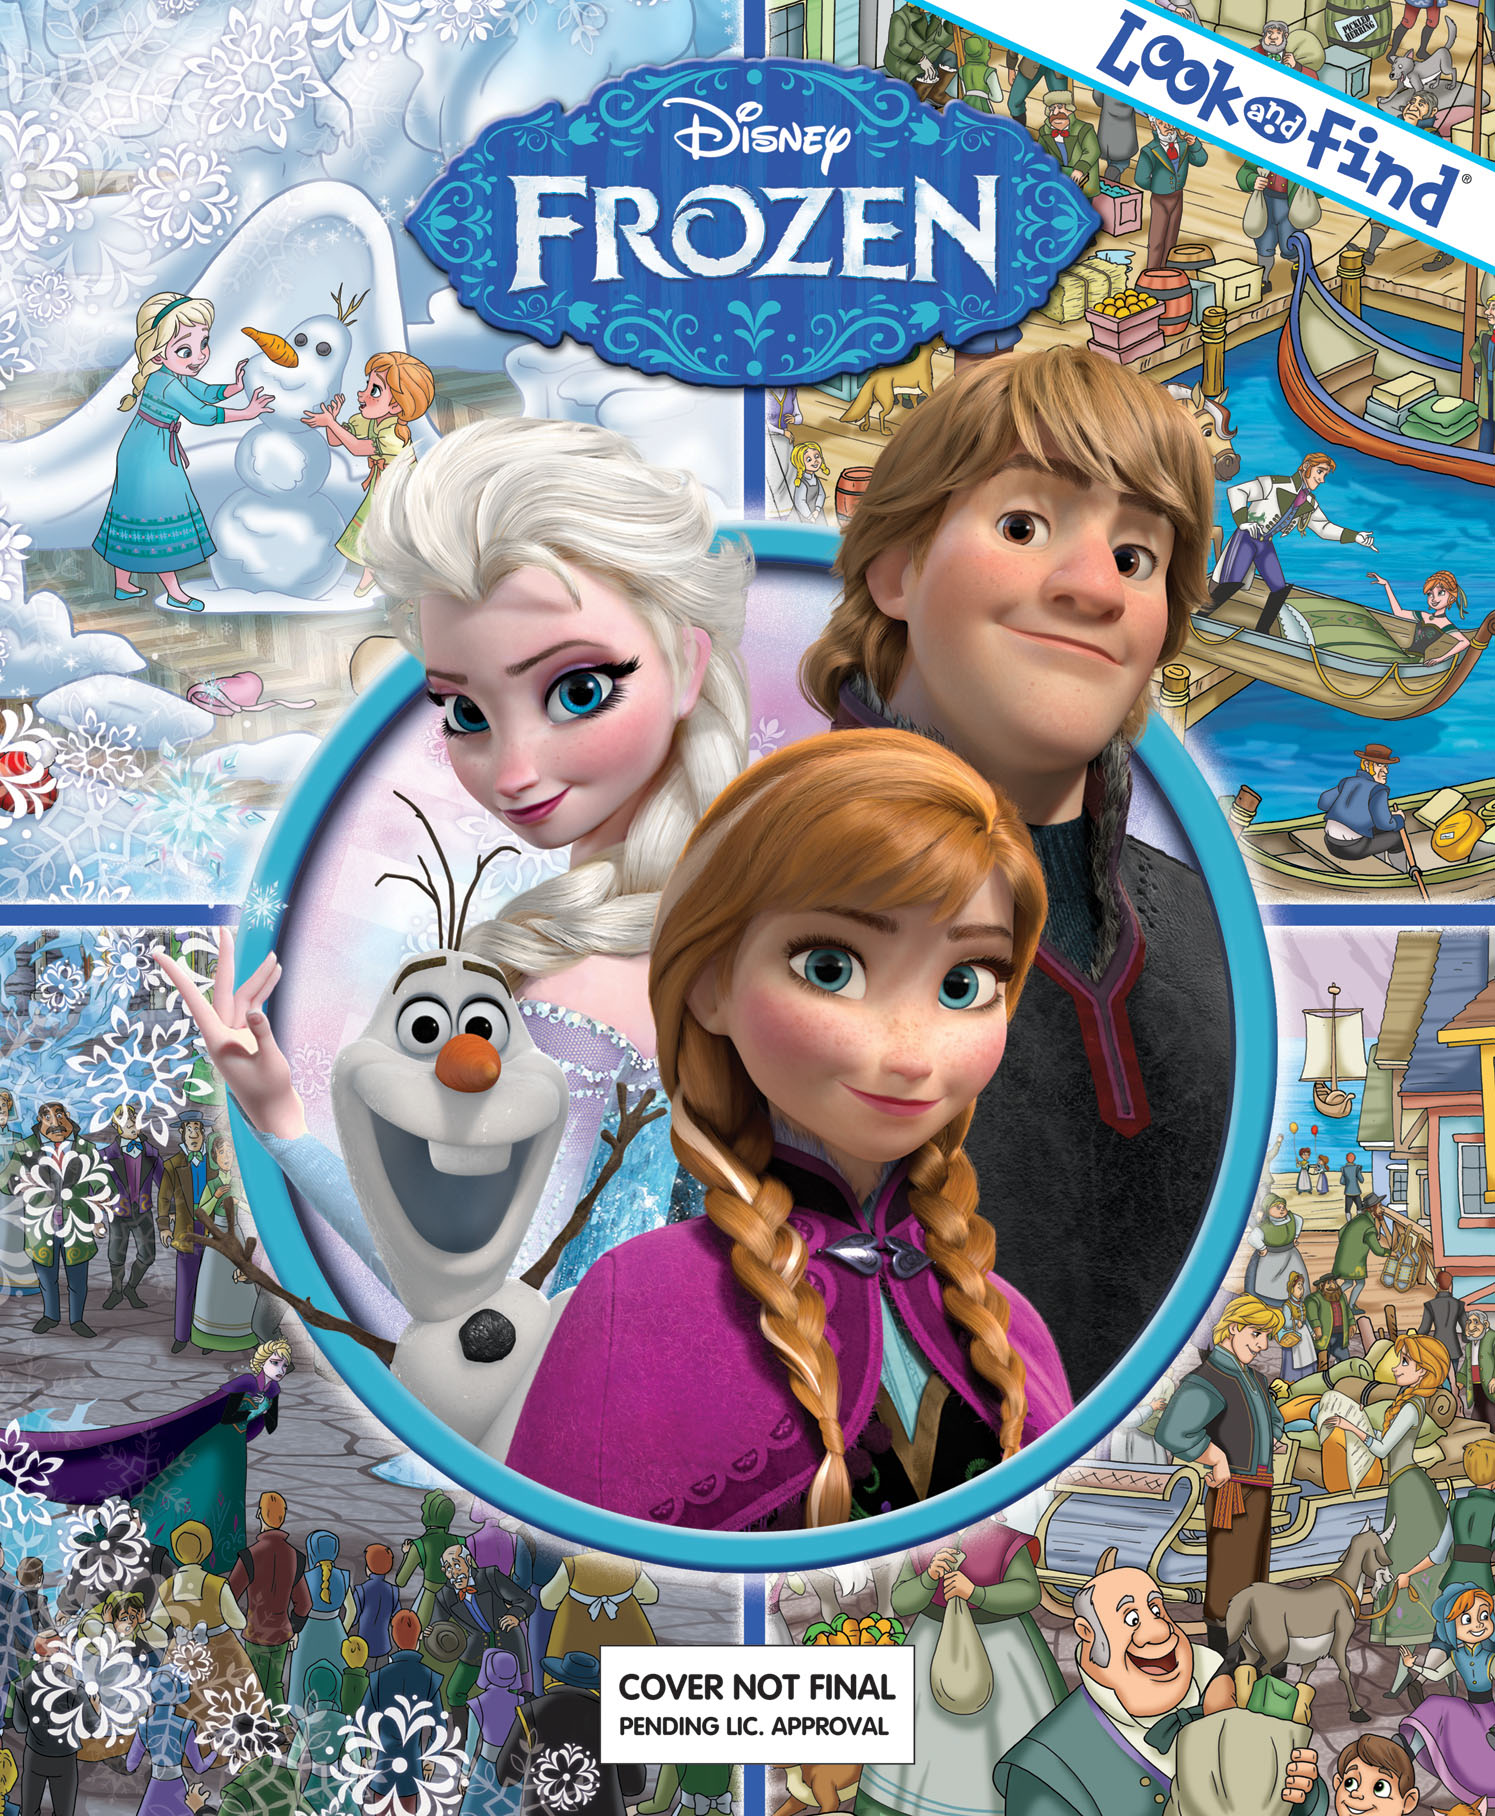 story books of frozen